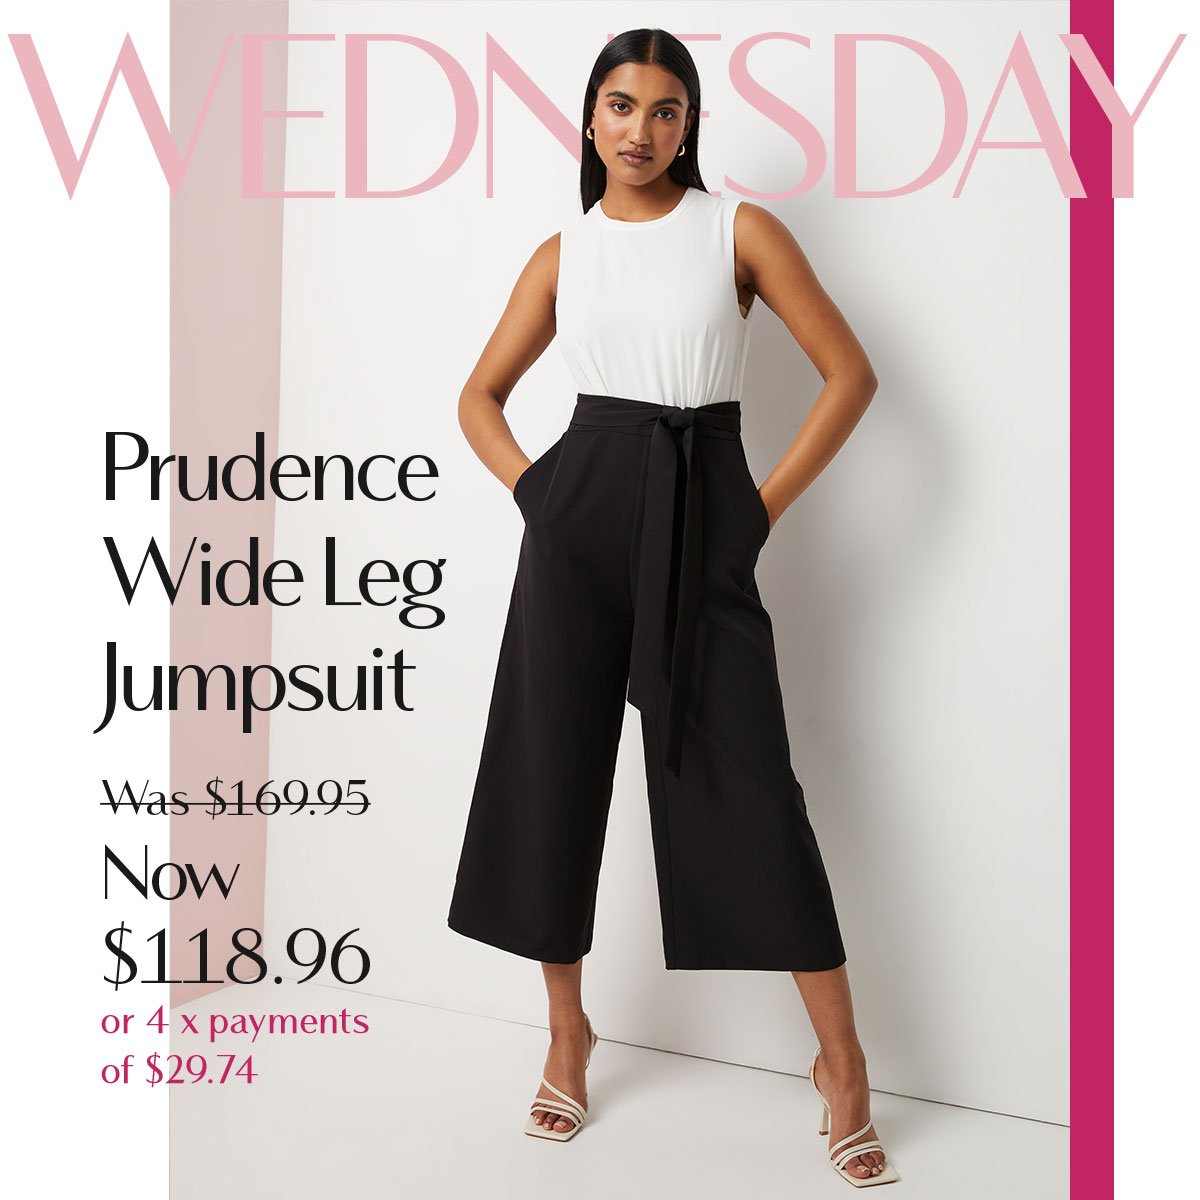 WEDNESDAY | Prudence Wide Leg Jumpsuit Was $169.95 Now $118.96  or 4 x payments of $29.74